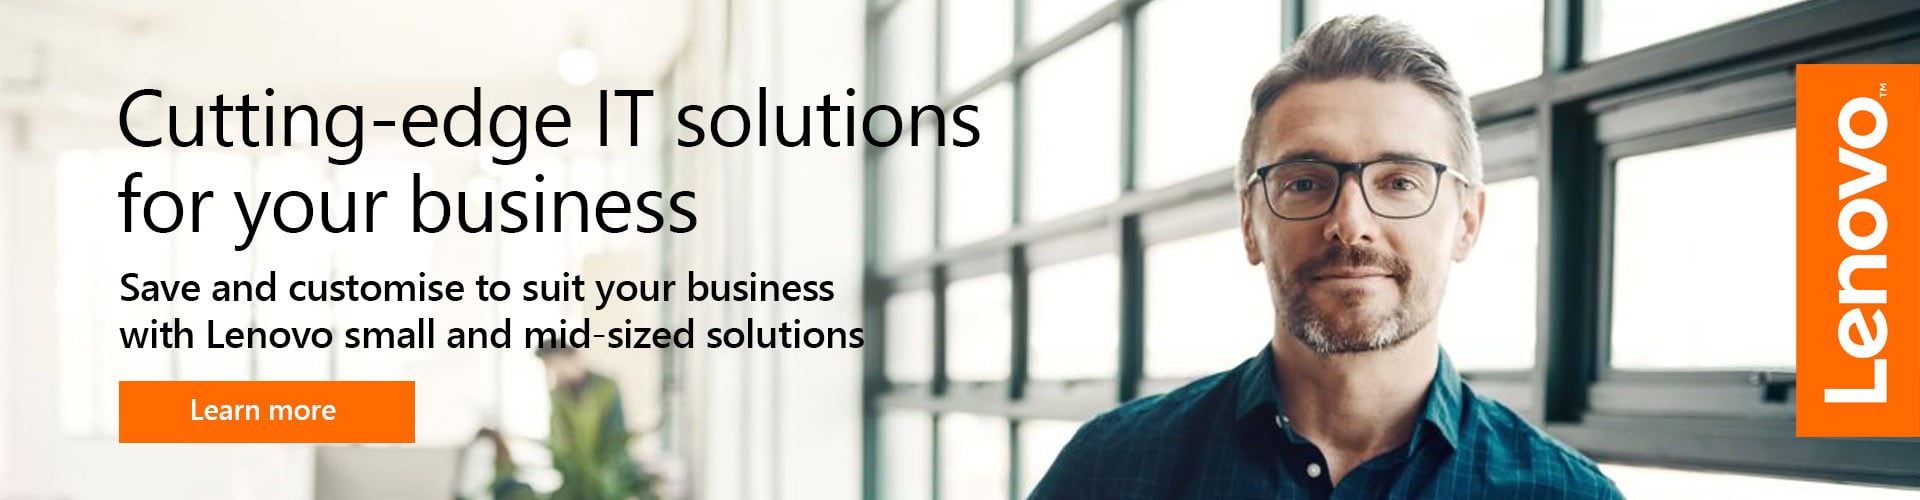 Save and customise to suit your business with Lenovo small and medium-sized solutions